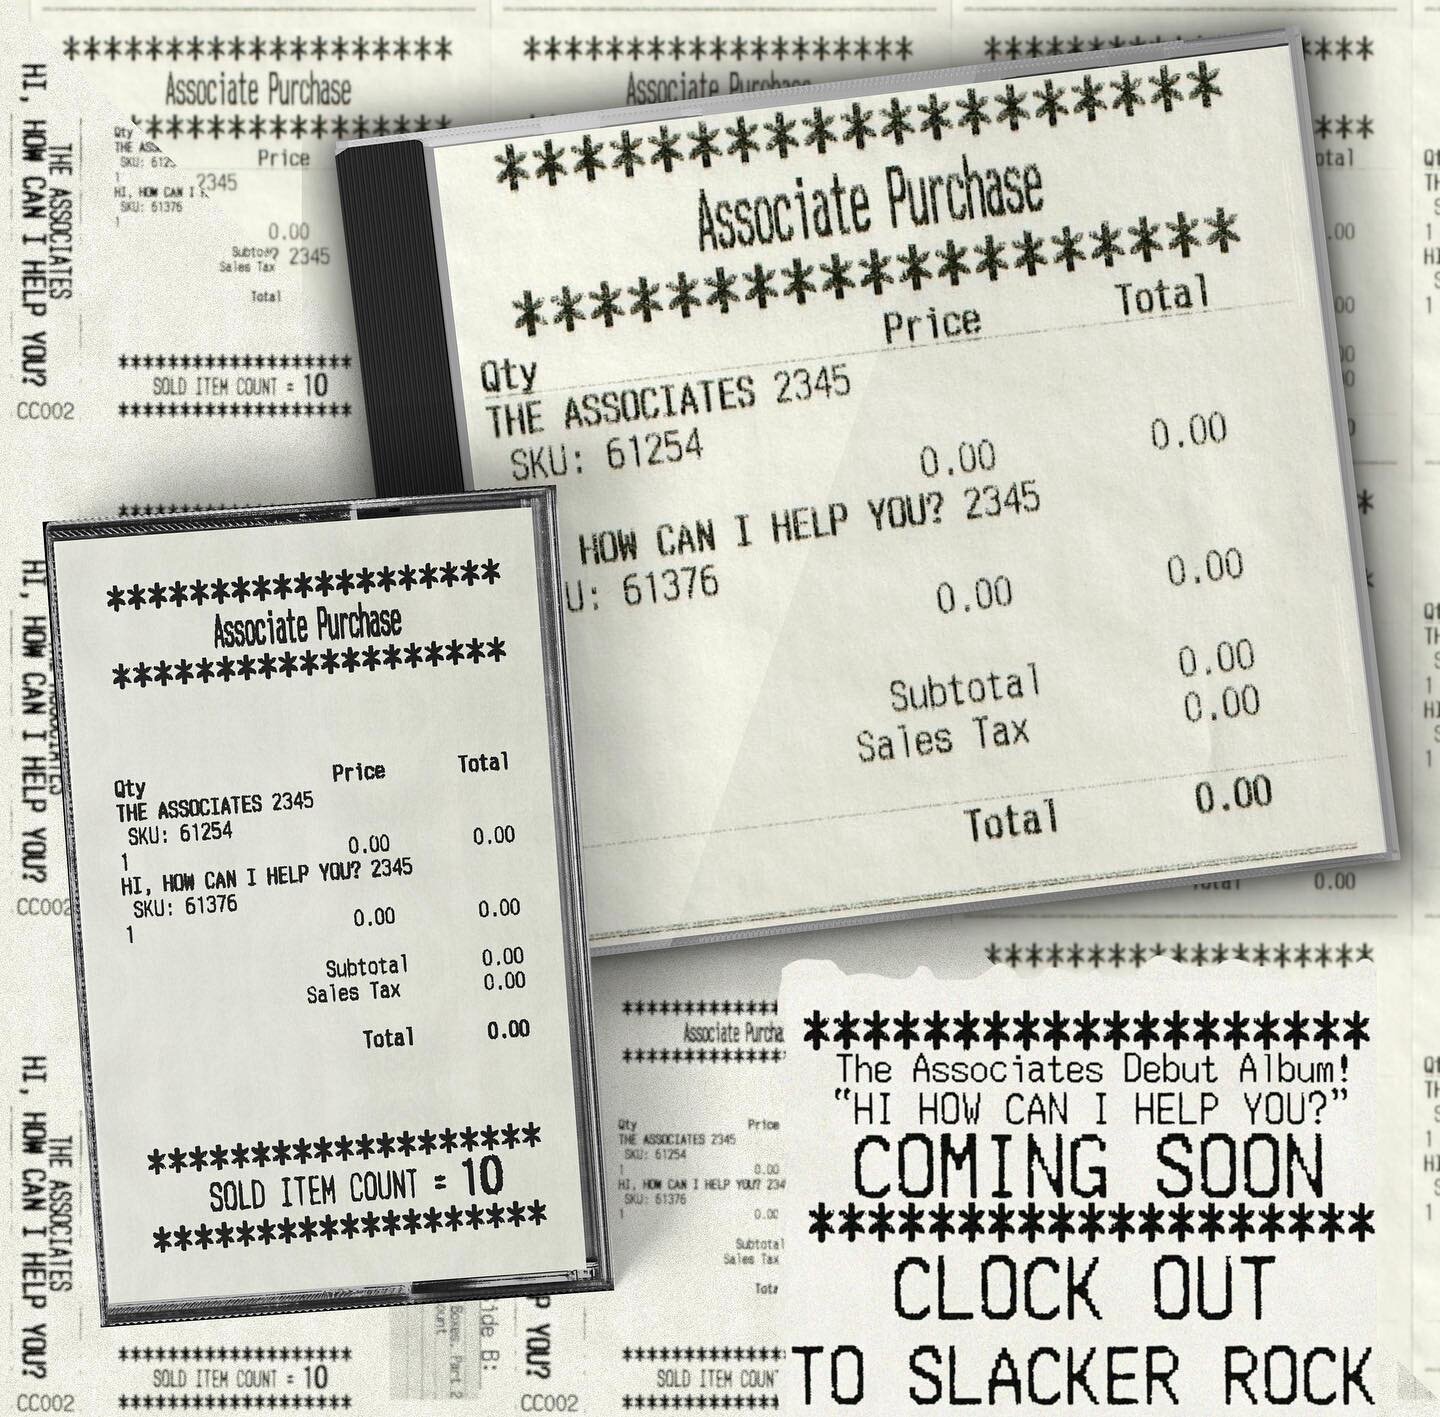 Hear the The Associates on CD and Cassette soon through @collectionctr 
Pre-Order Today!
Clock out to Slacker Rock #and listen to The Story of 3 minimum wage employees!
Link in bio

#slacker #punk #rock #punkrock #slackerrock #punkmusic #music #casse